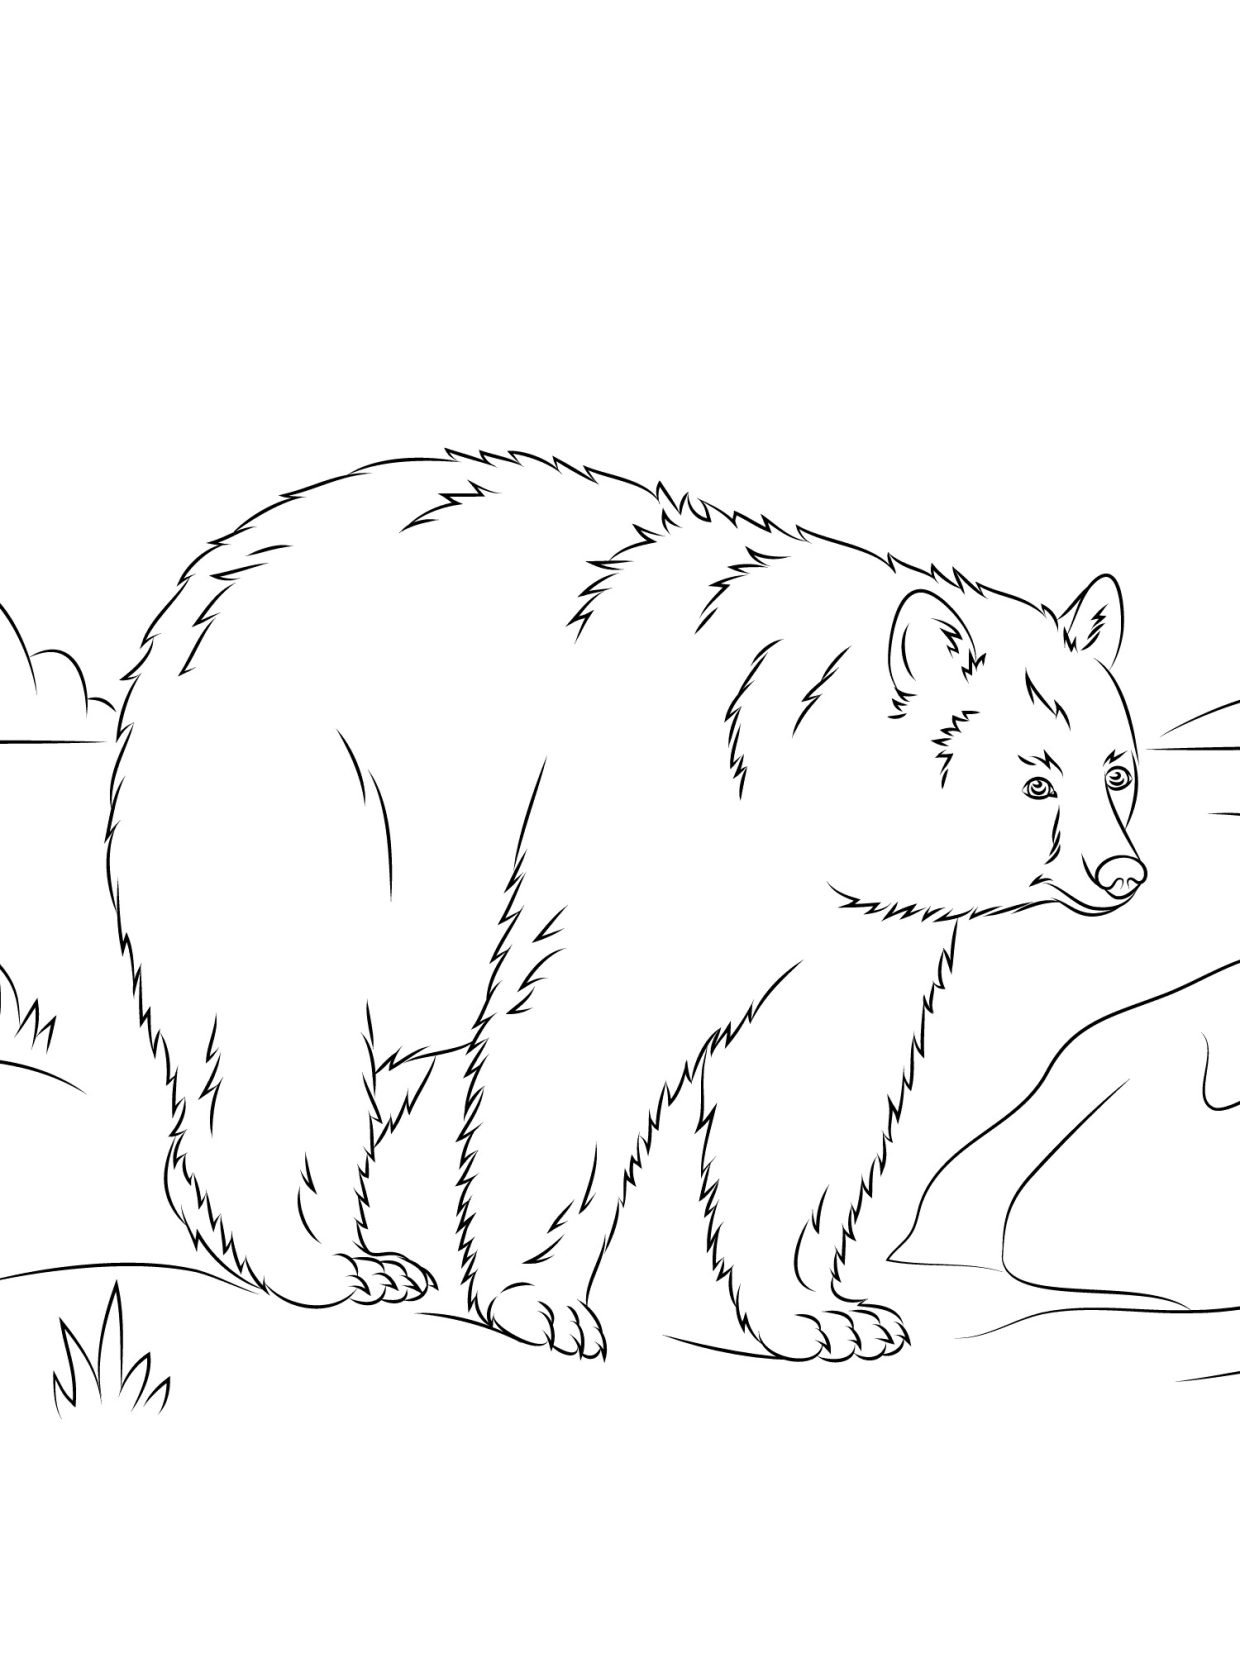 Explore the Wild with Free Printable Bear Coloring Pages